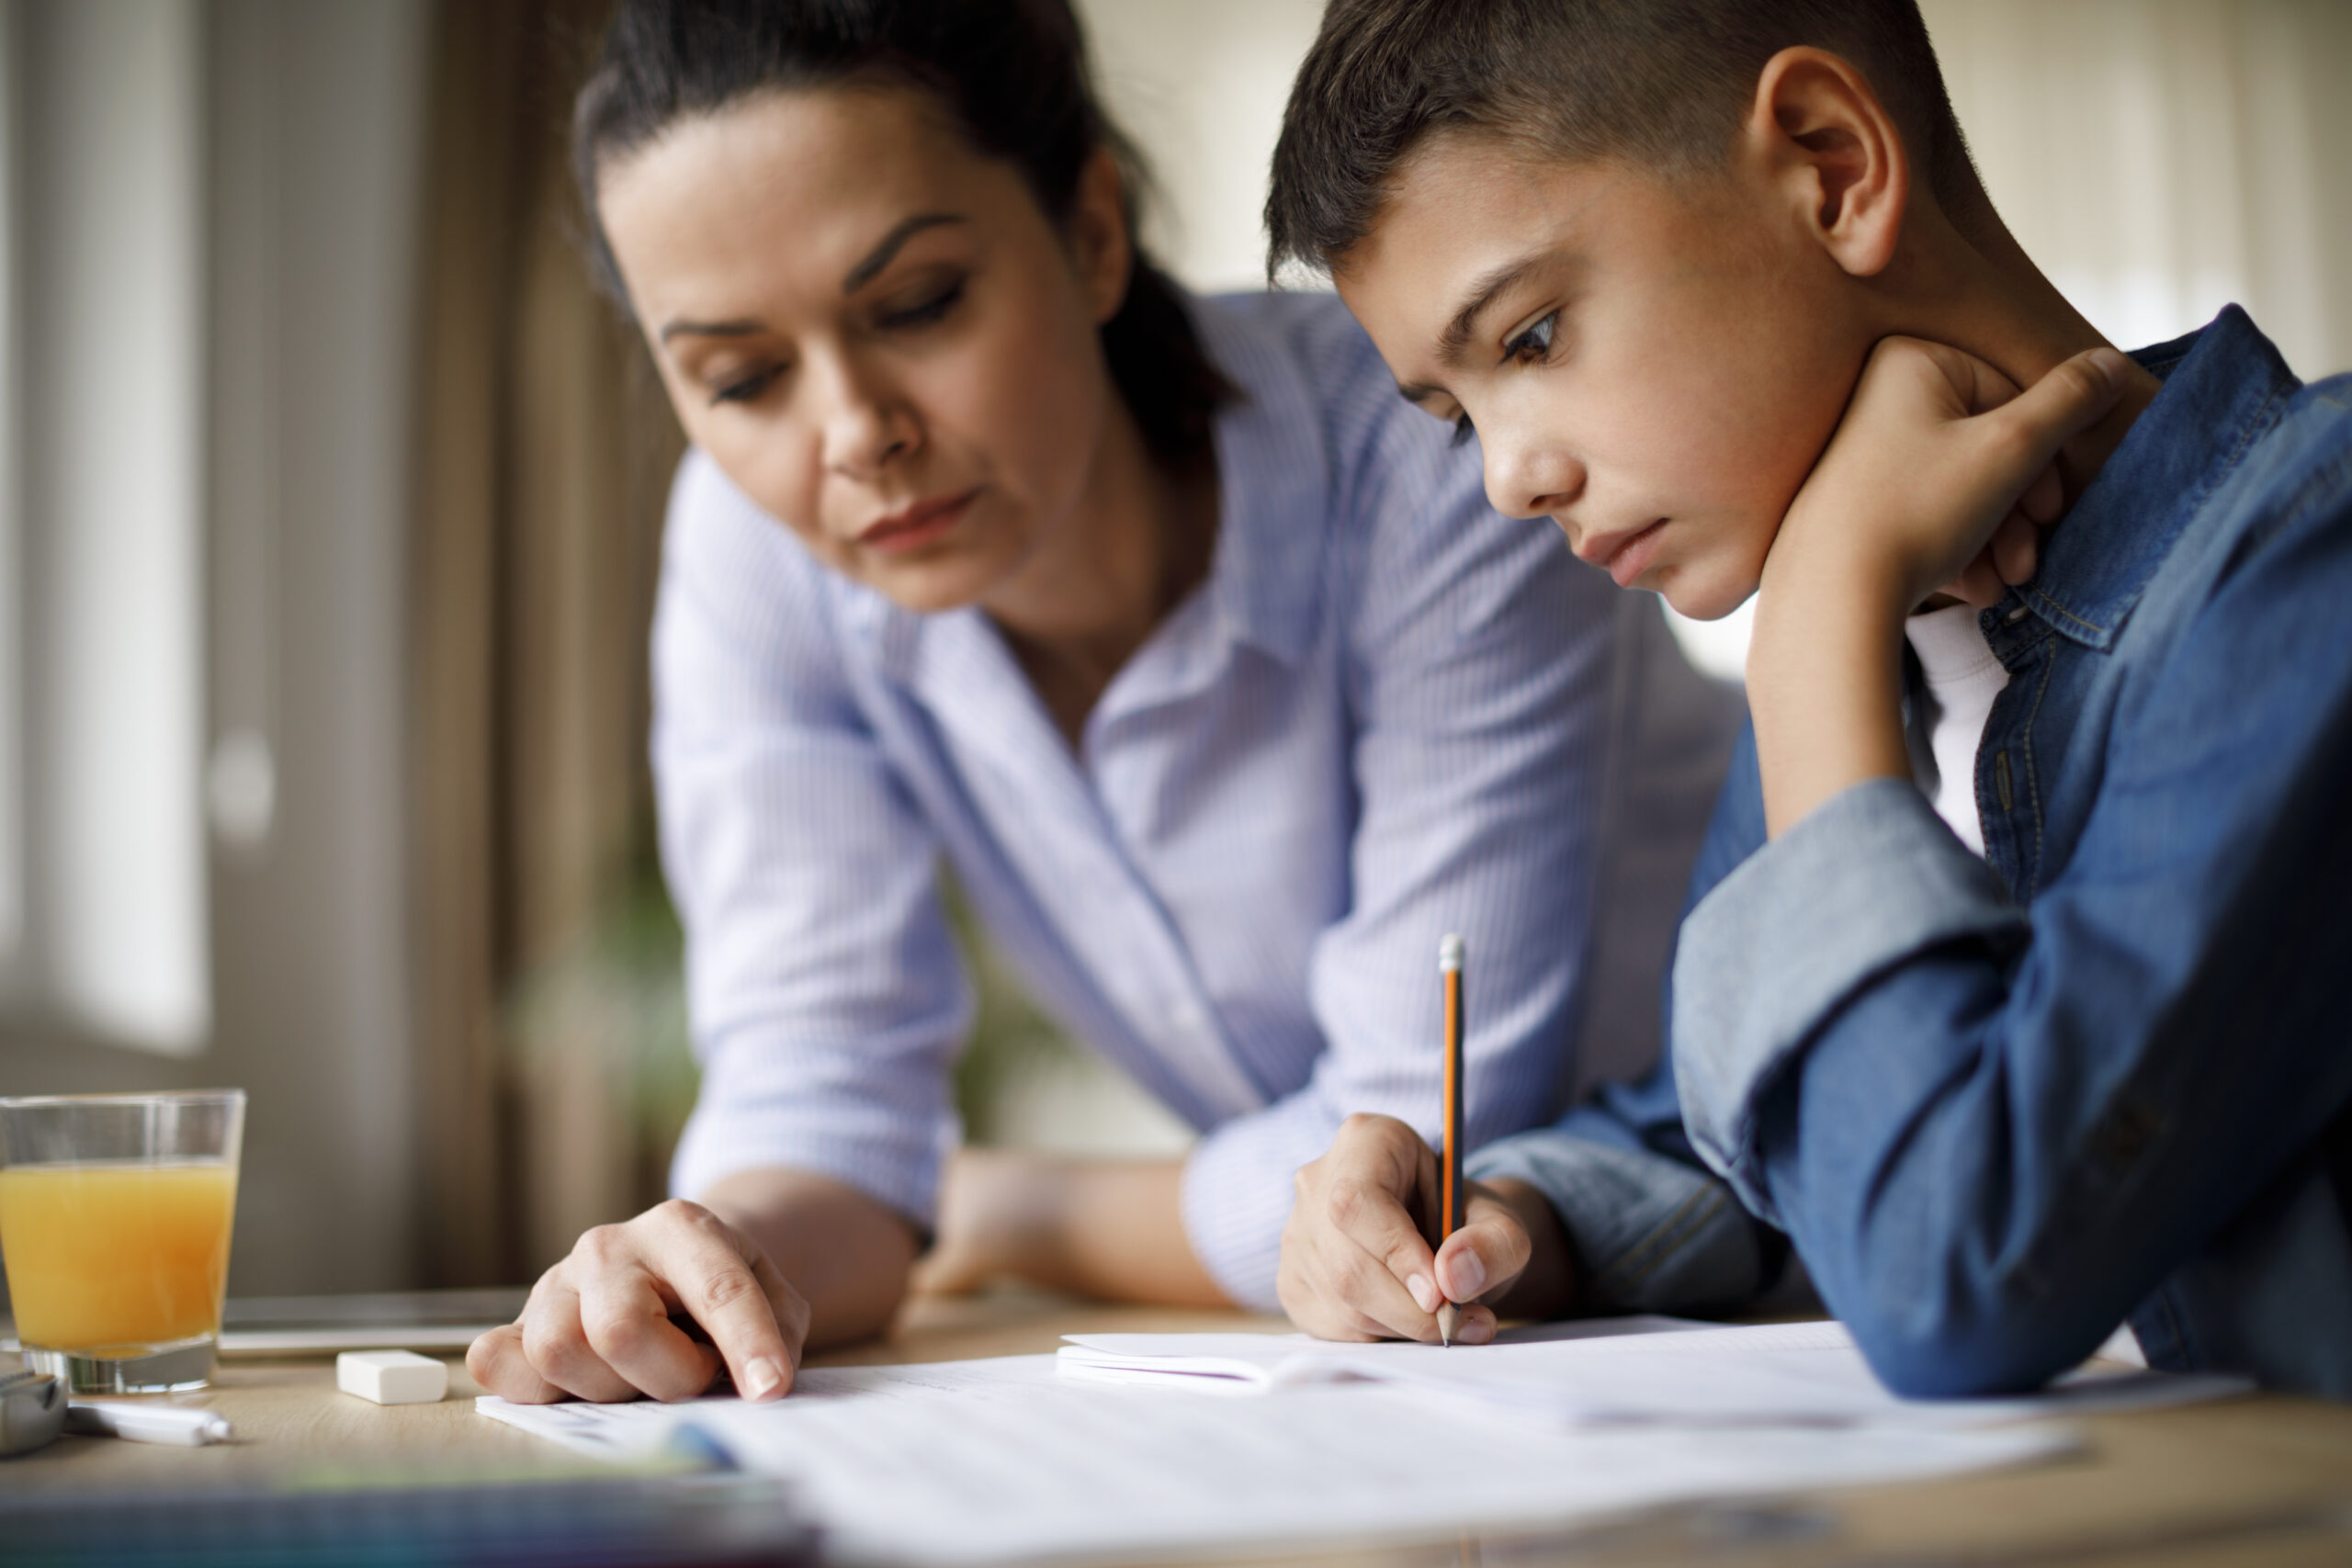 A mother helps her son with homework